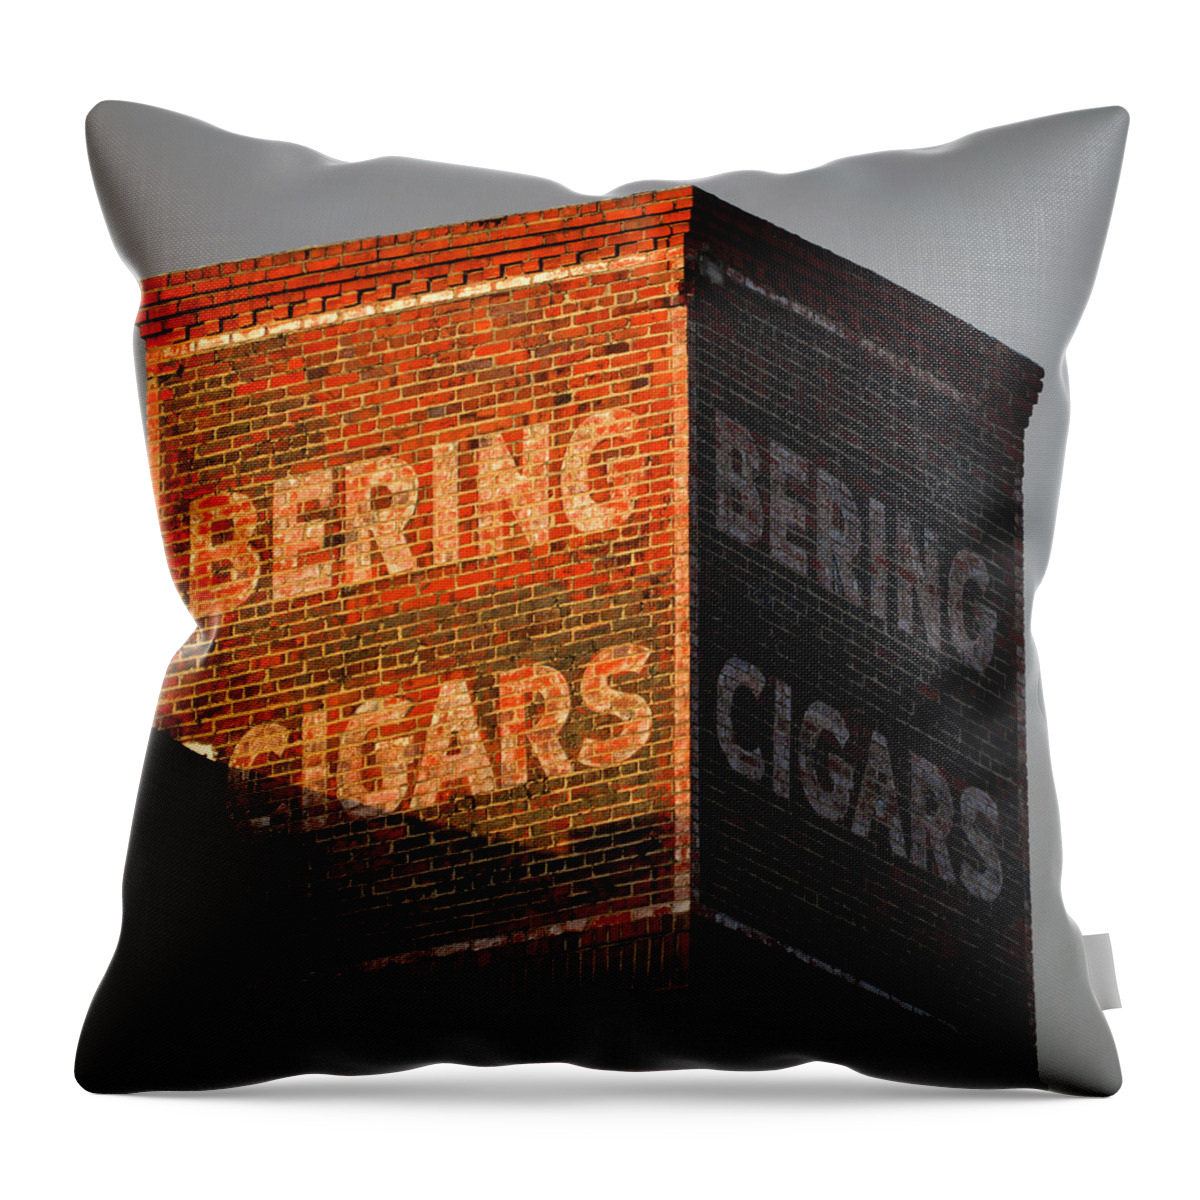 Cigar Factory Throw Pillow featuring the photograph Bering Cigar Factory one by David Lee Thompson